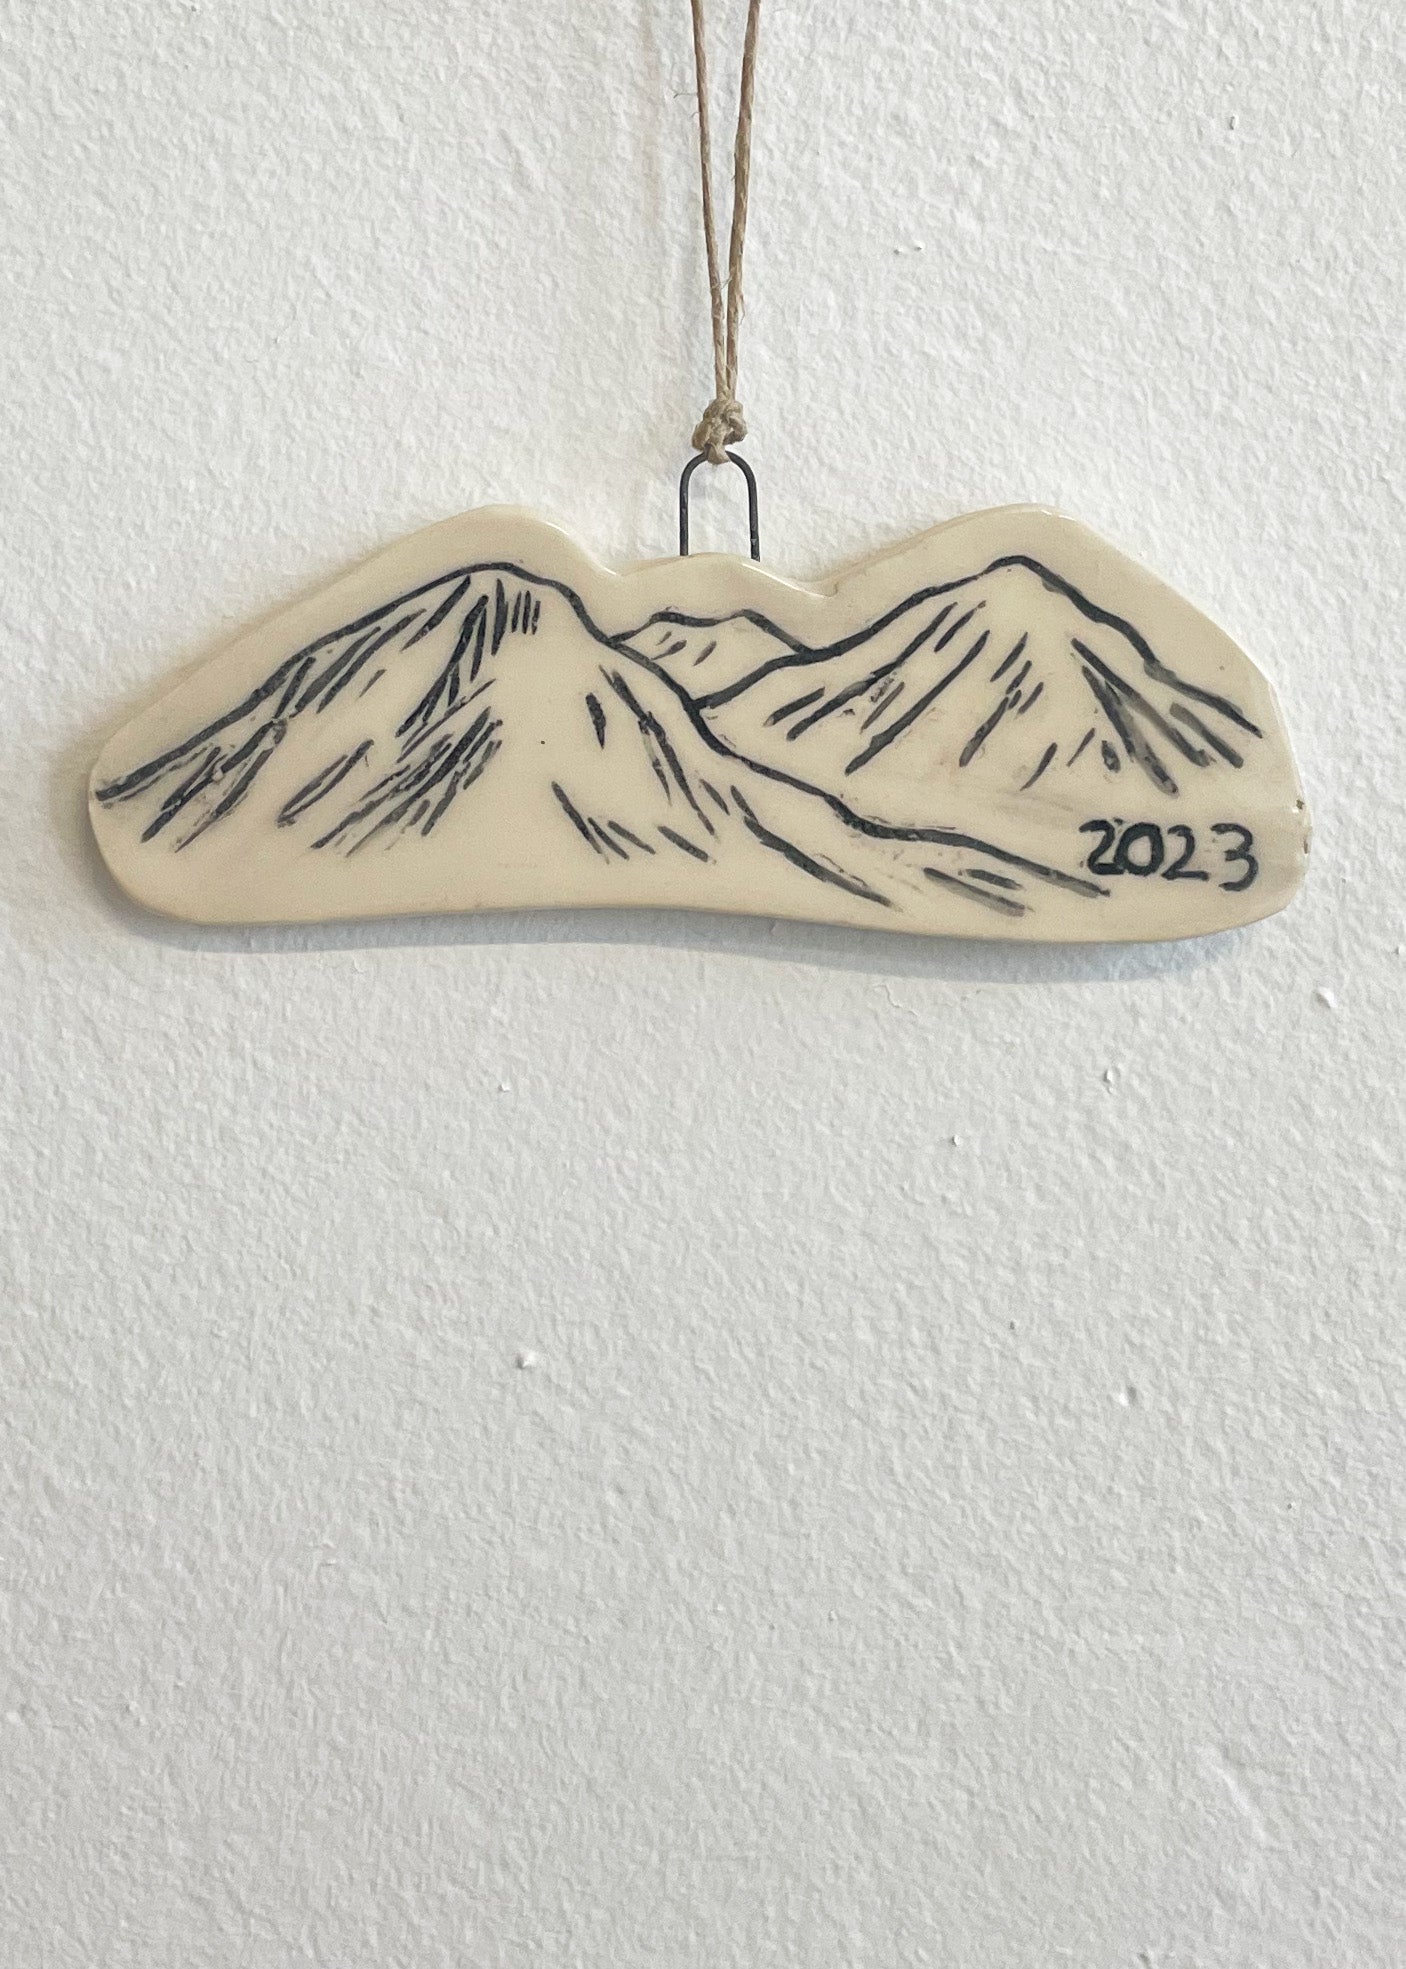 Mountains Ornament 2023